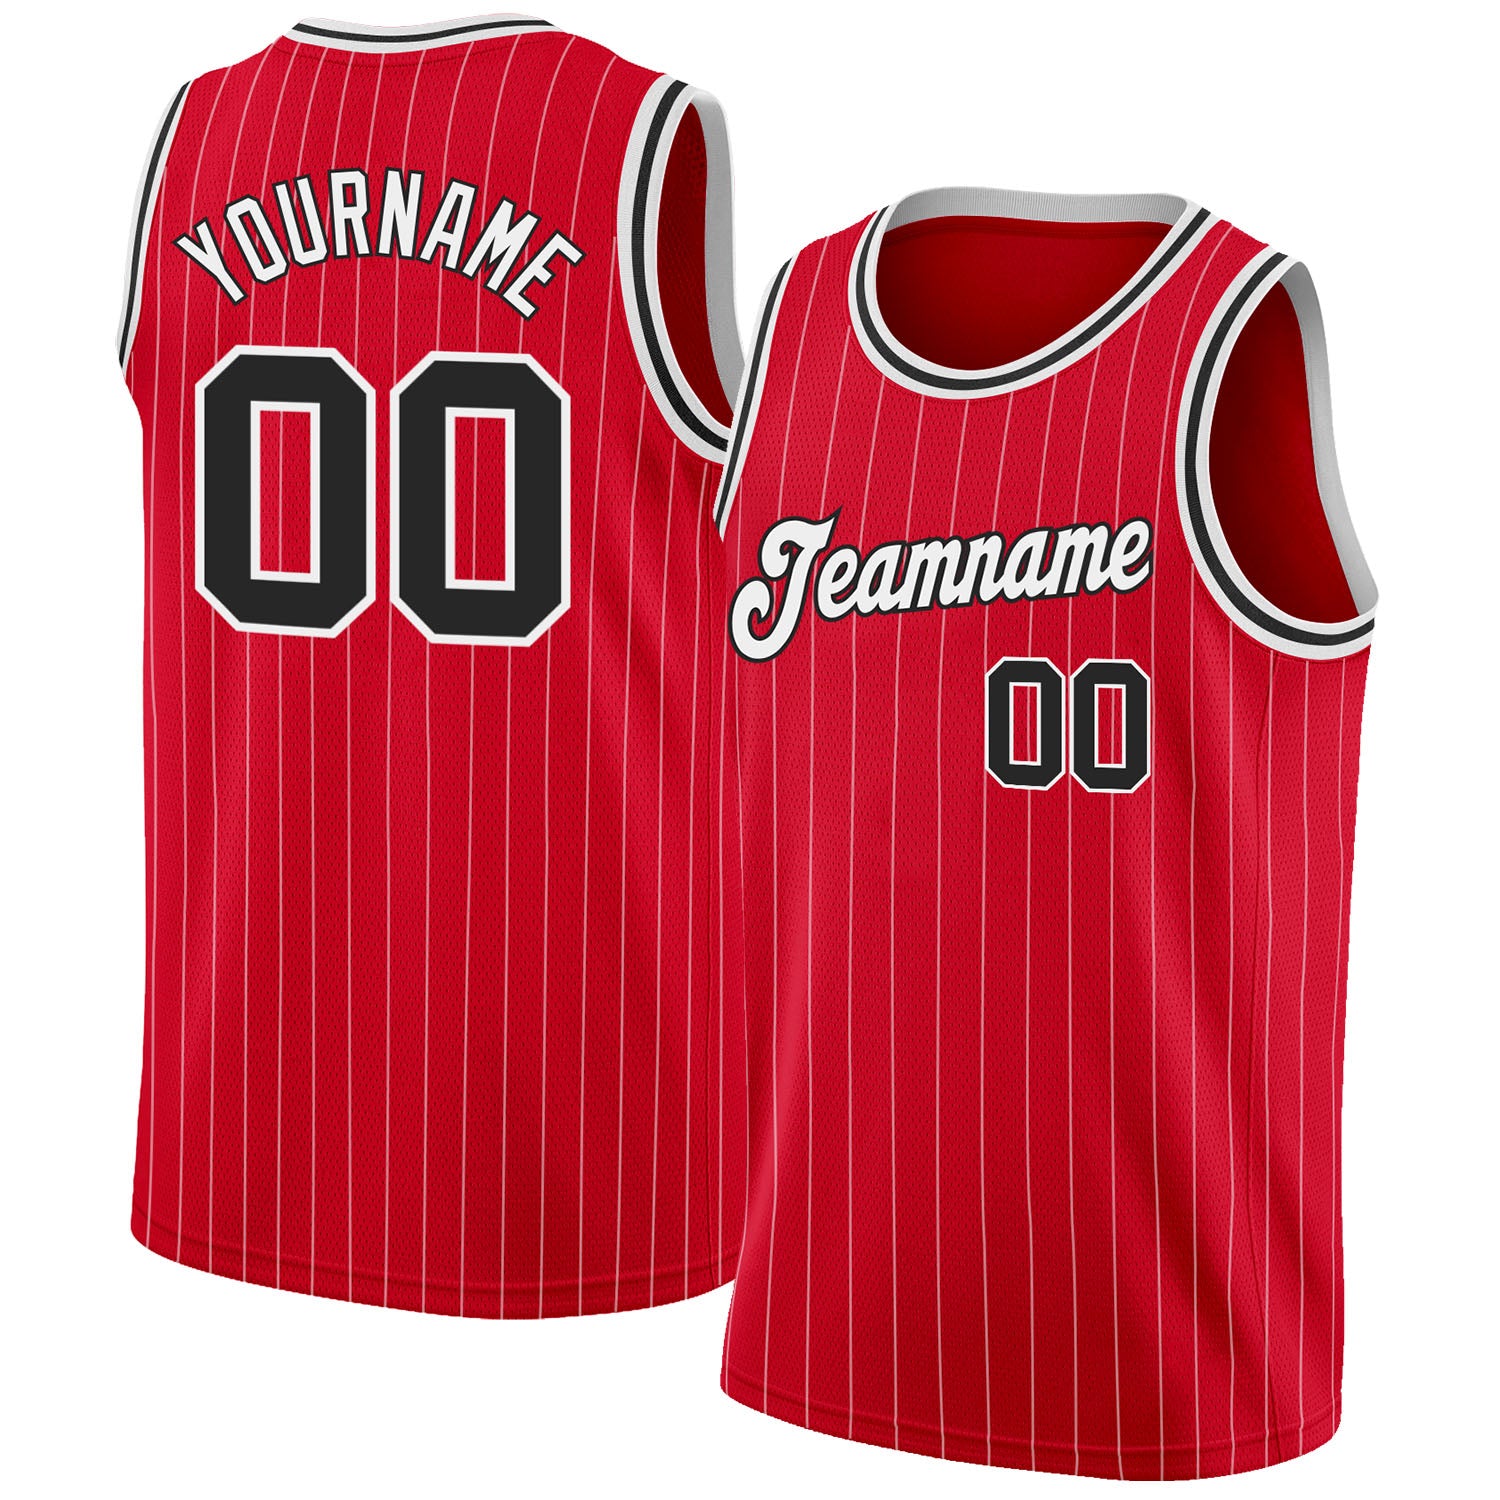 FANSIDEA Custom Black Red Fade Fashion Authentic City Edition Basketball Jersey Men's Size:L